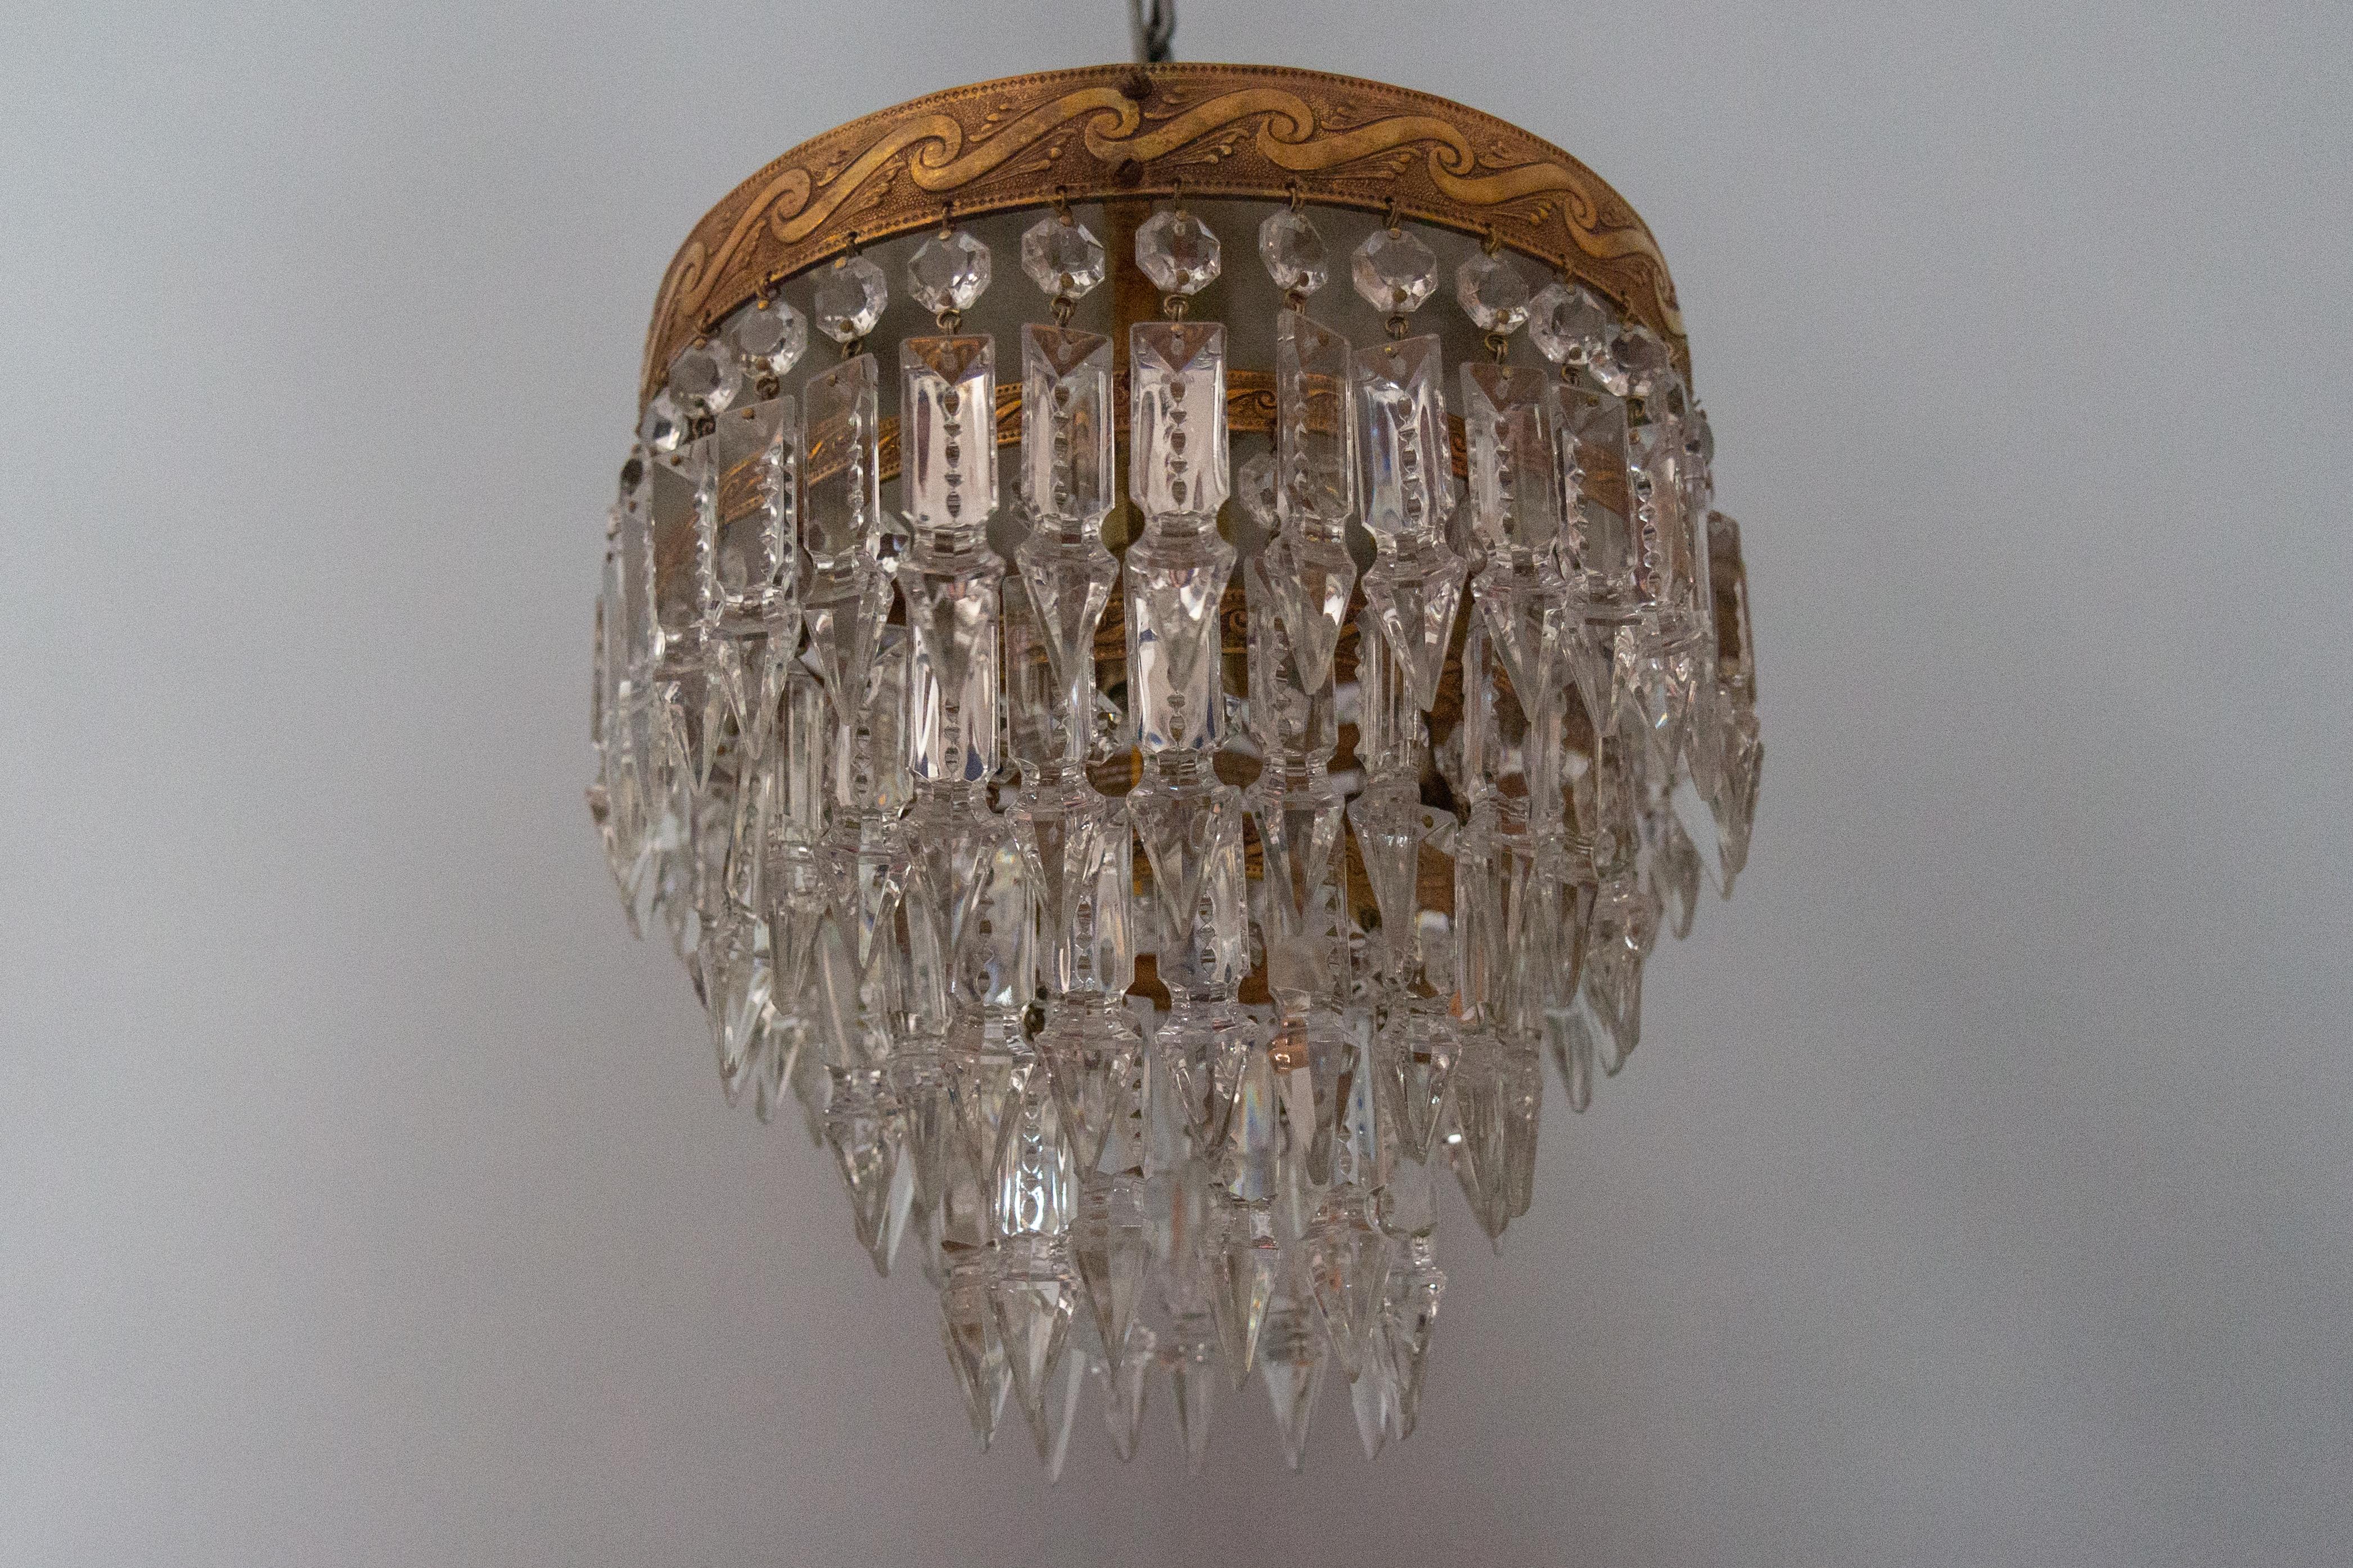 French Art Deco crystal glass and brass ceiling light or flush mount, the 1930s.
This adorable Art Deo ceiling light or flush mount features a four-tier brass frame with impressive crystal glass prisms and beads. 
One new socket for E27 (E26) size